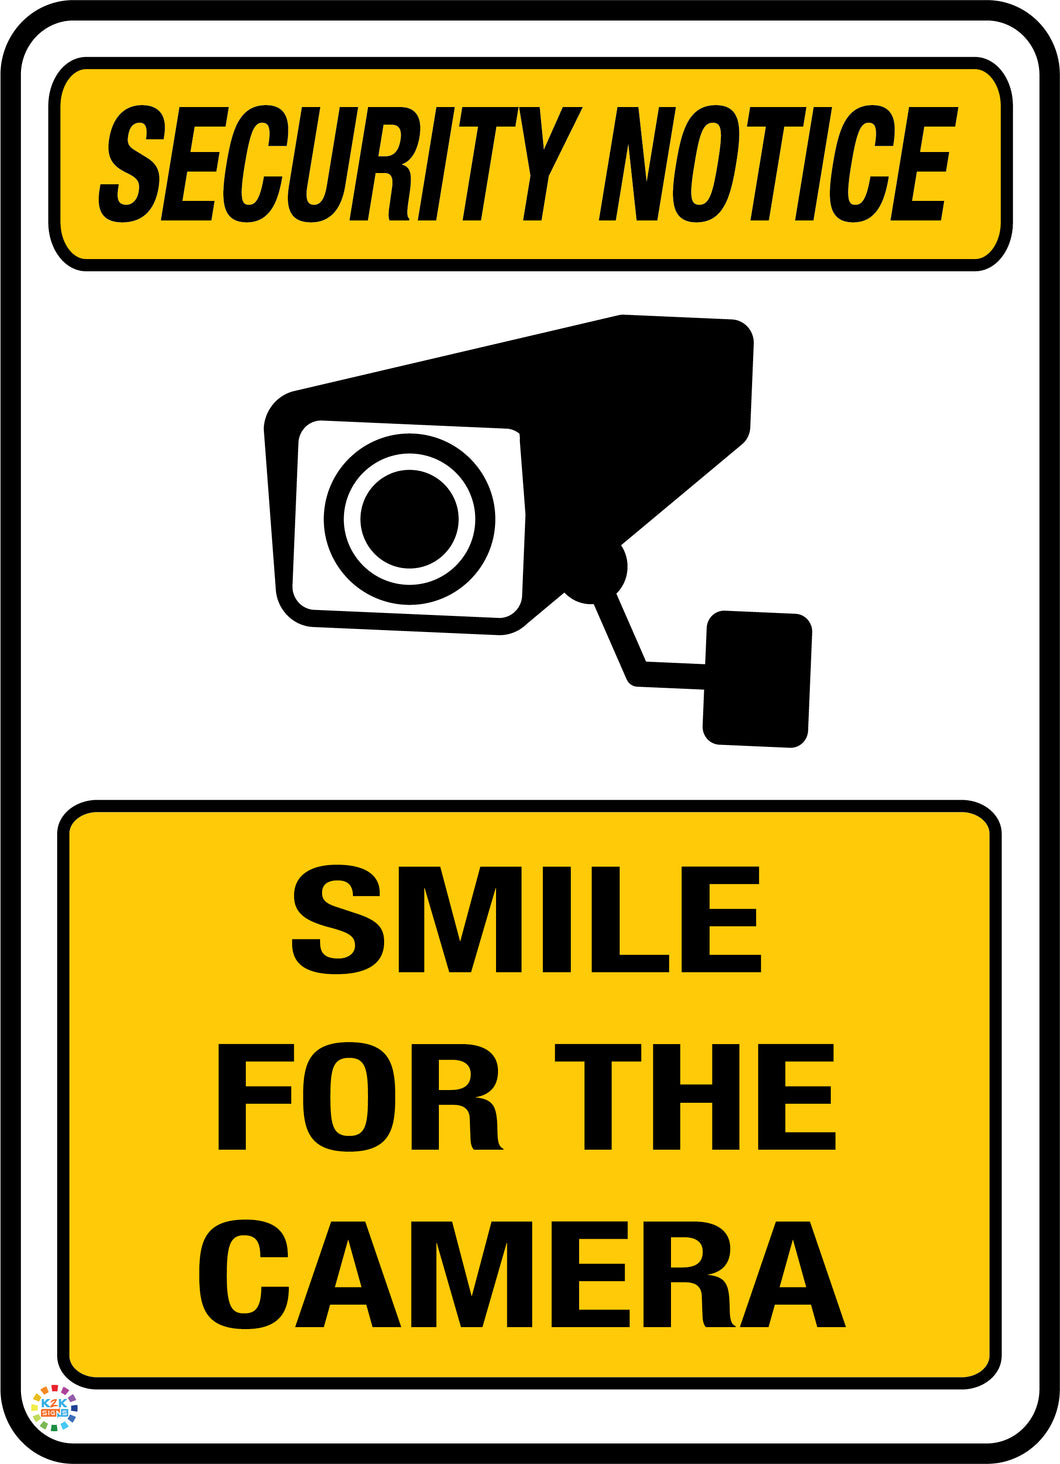 Security Notice - Smile for the Camera Sign